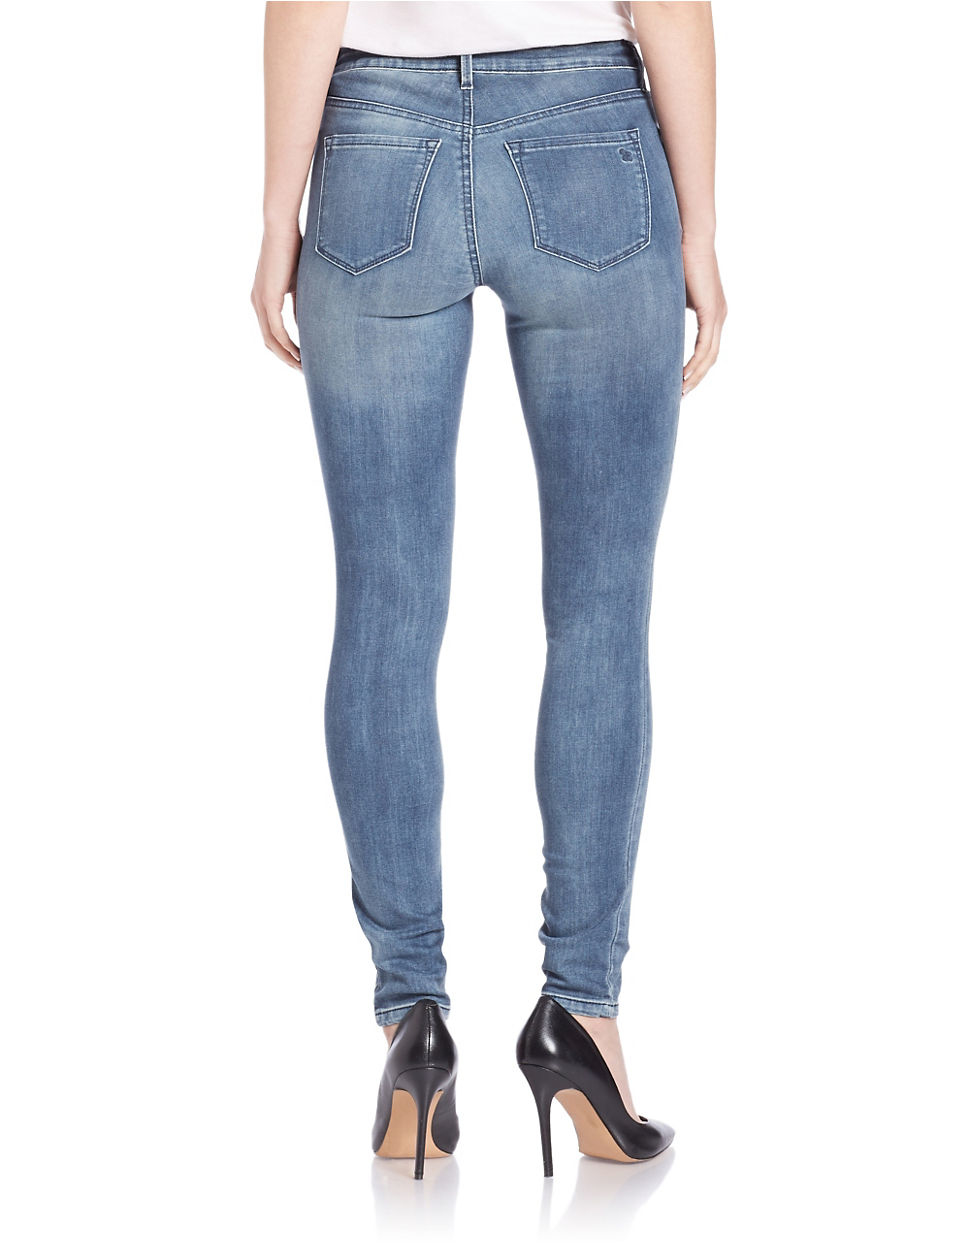 Lyst - Jessica simpson Kiss Me Super Skinny Jeans- Blue Rio in Blue